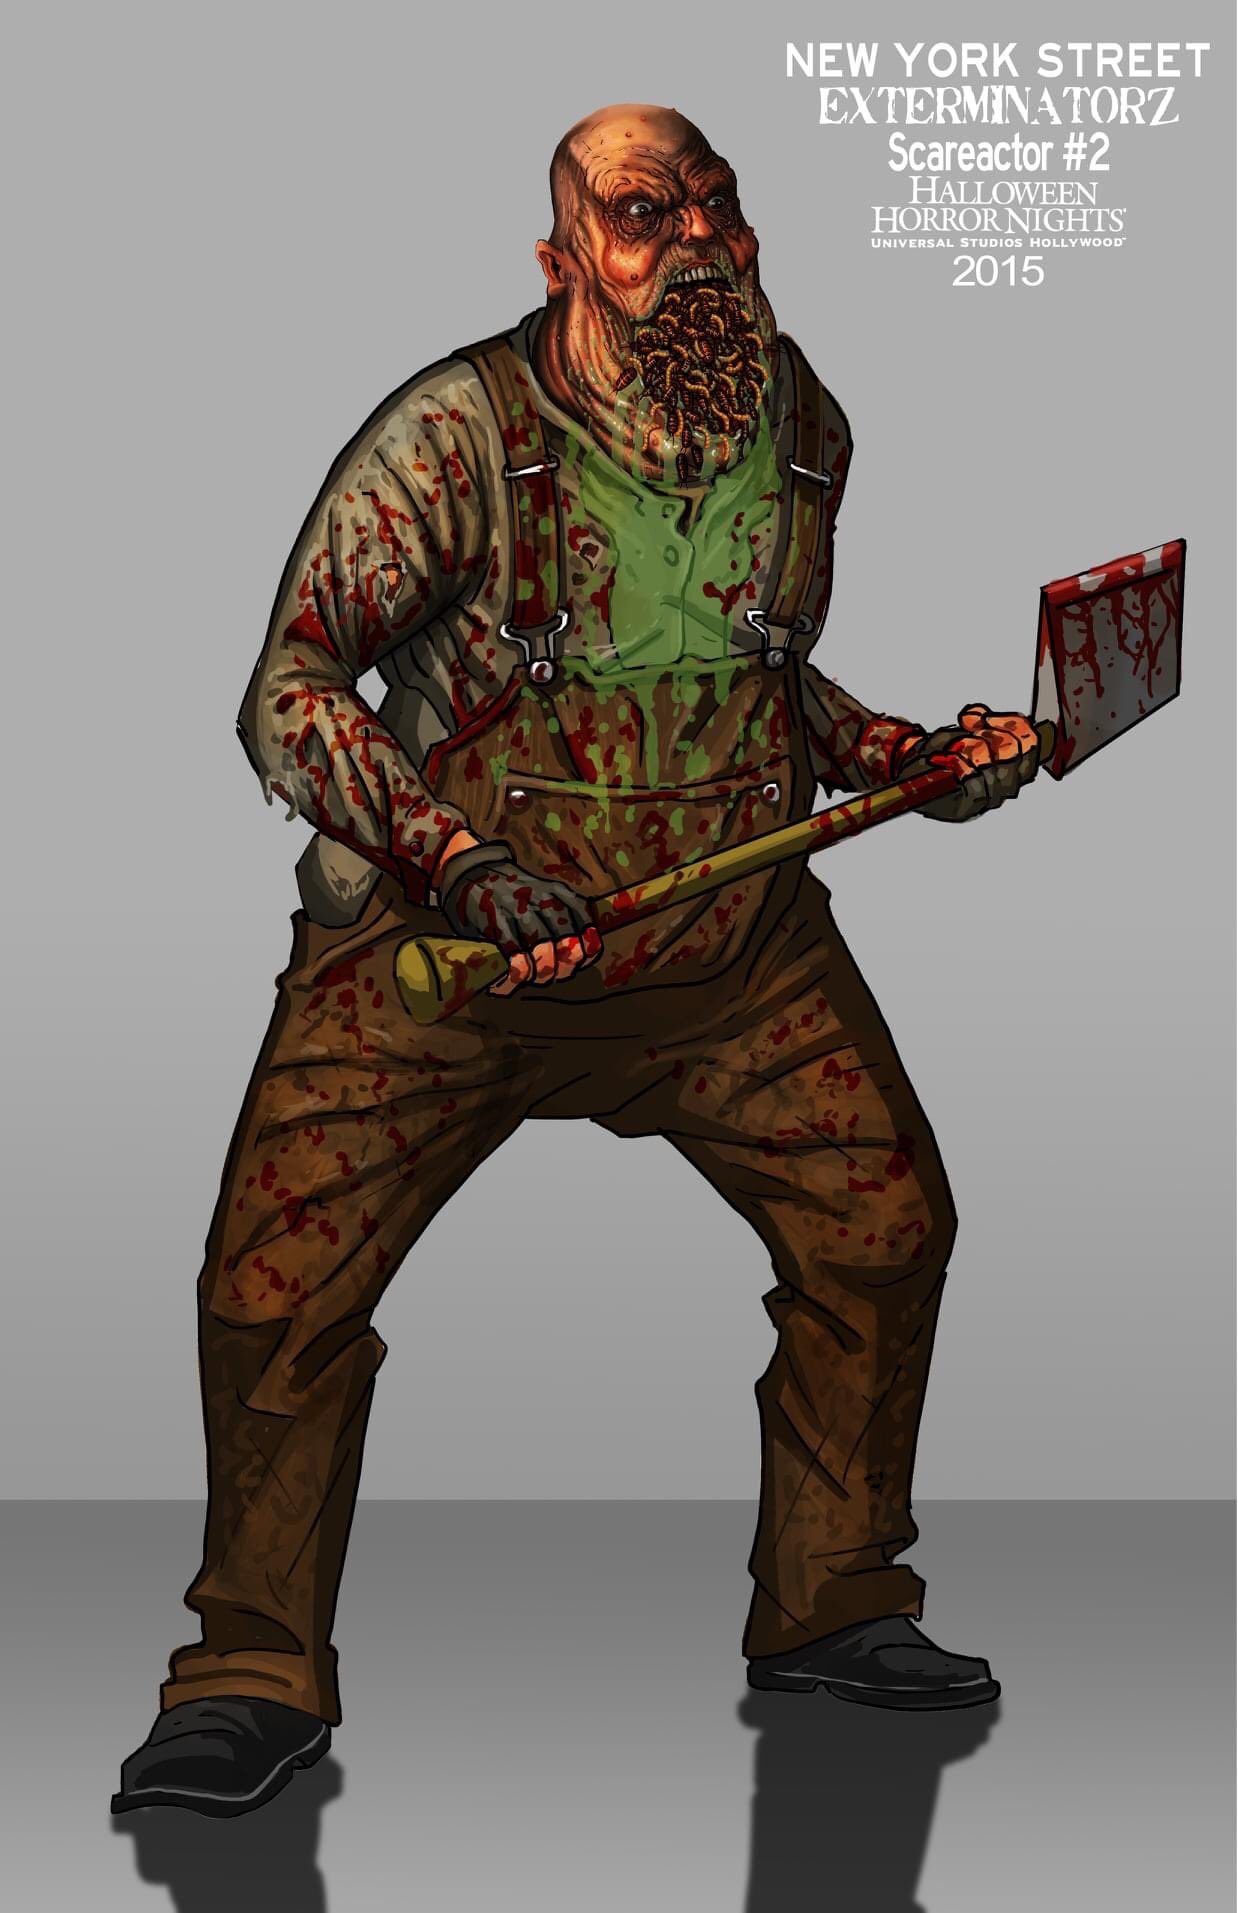 https://static.wikia.nocookie.net/halloweenhorrornights/images/e/e3/Maggot_Mouth_Concept_Art.jpeg/revision/latest?cb=20200930230914